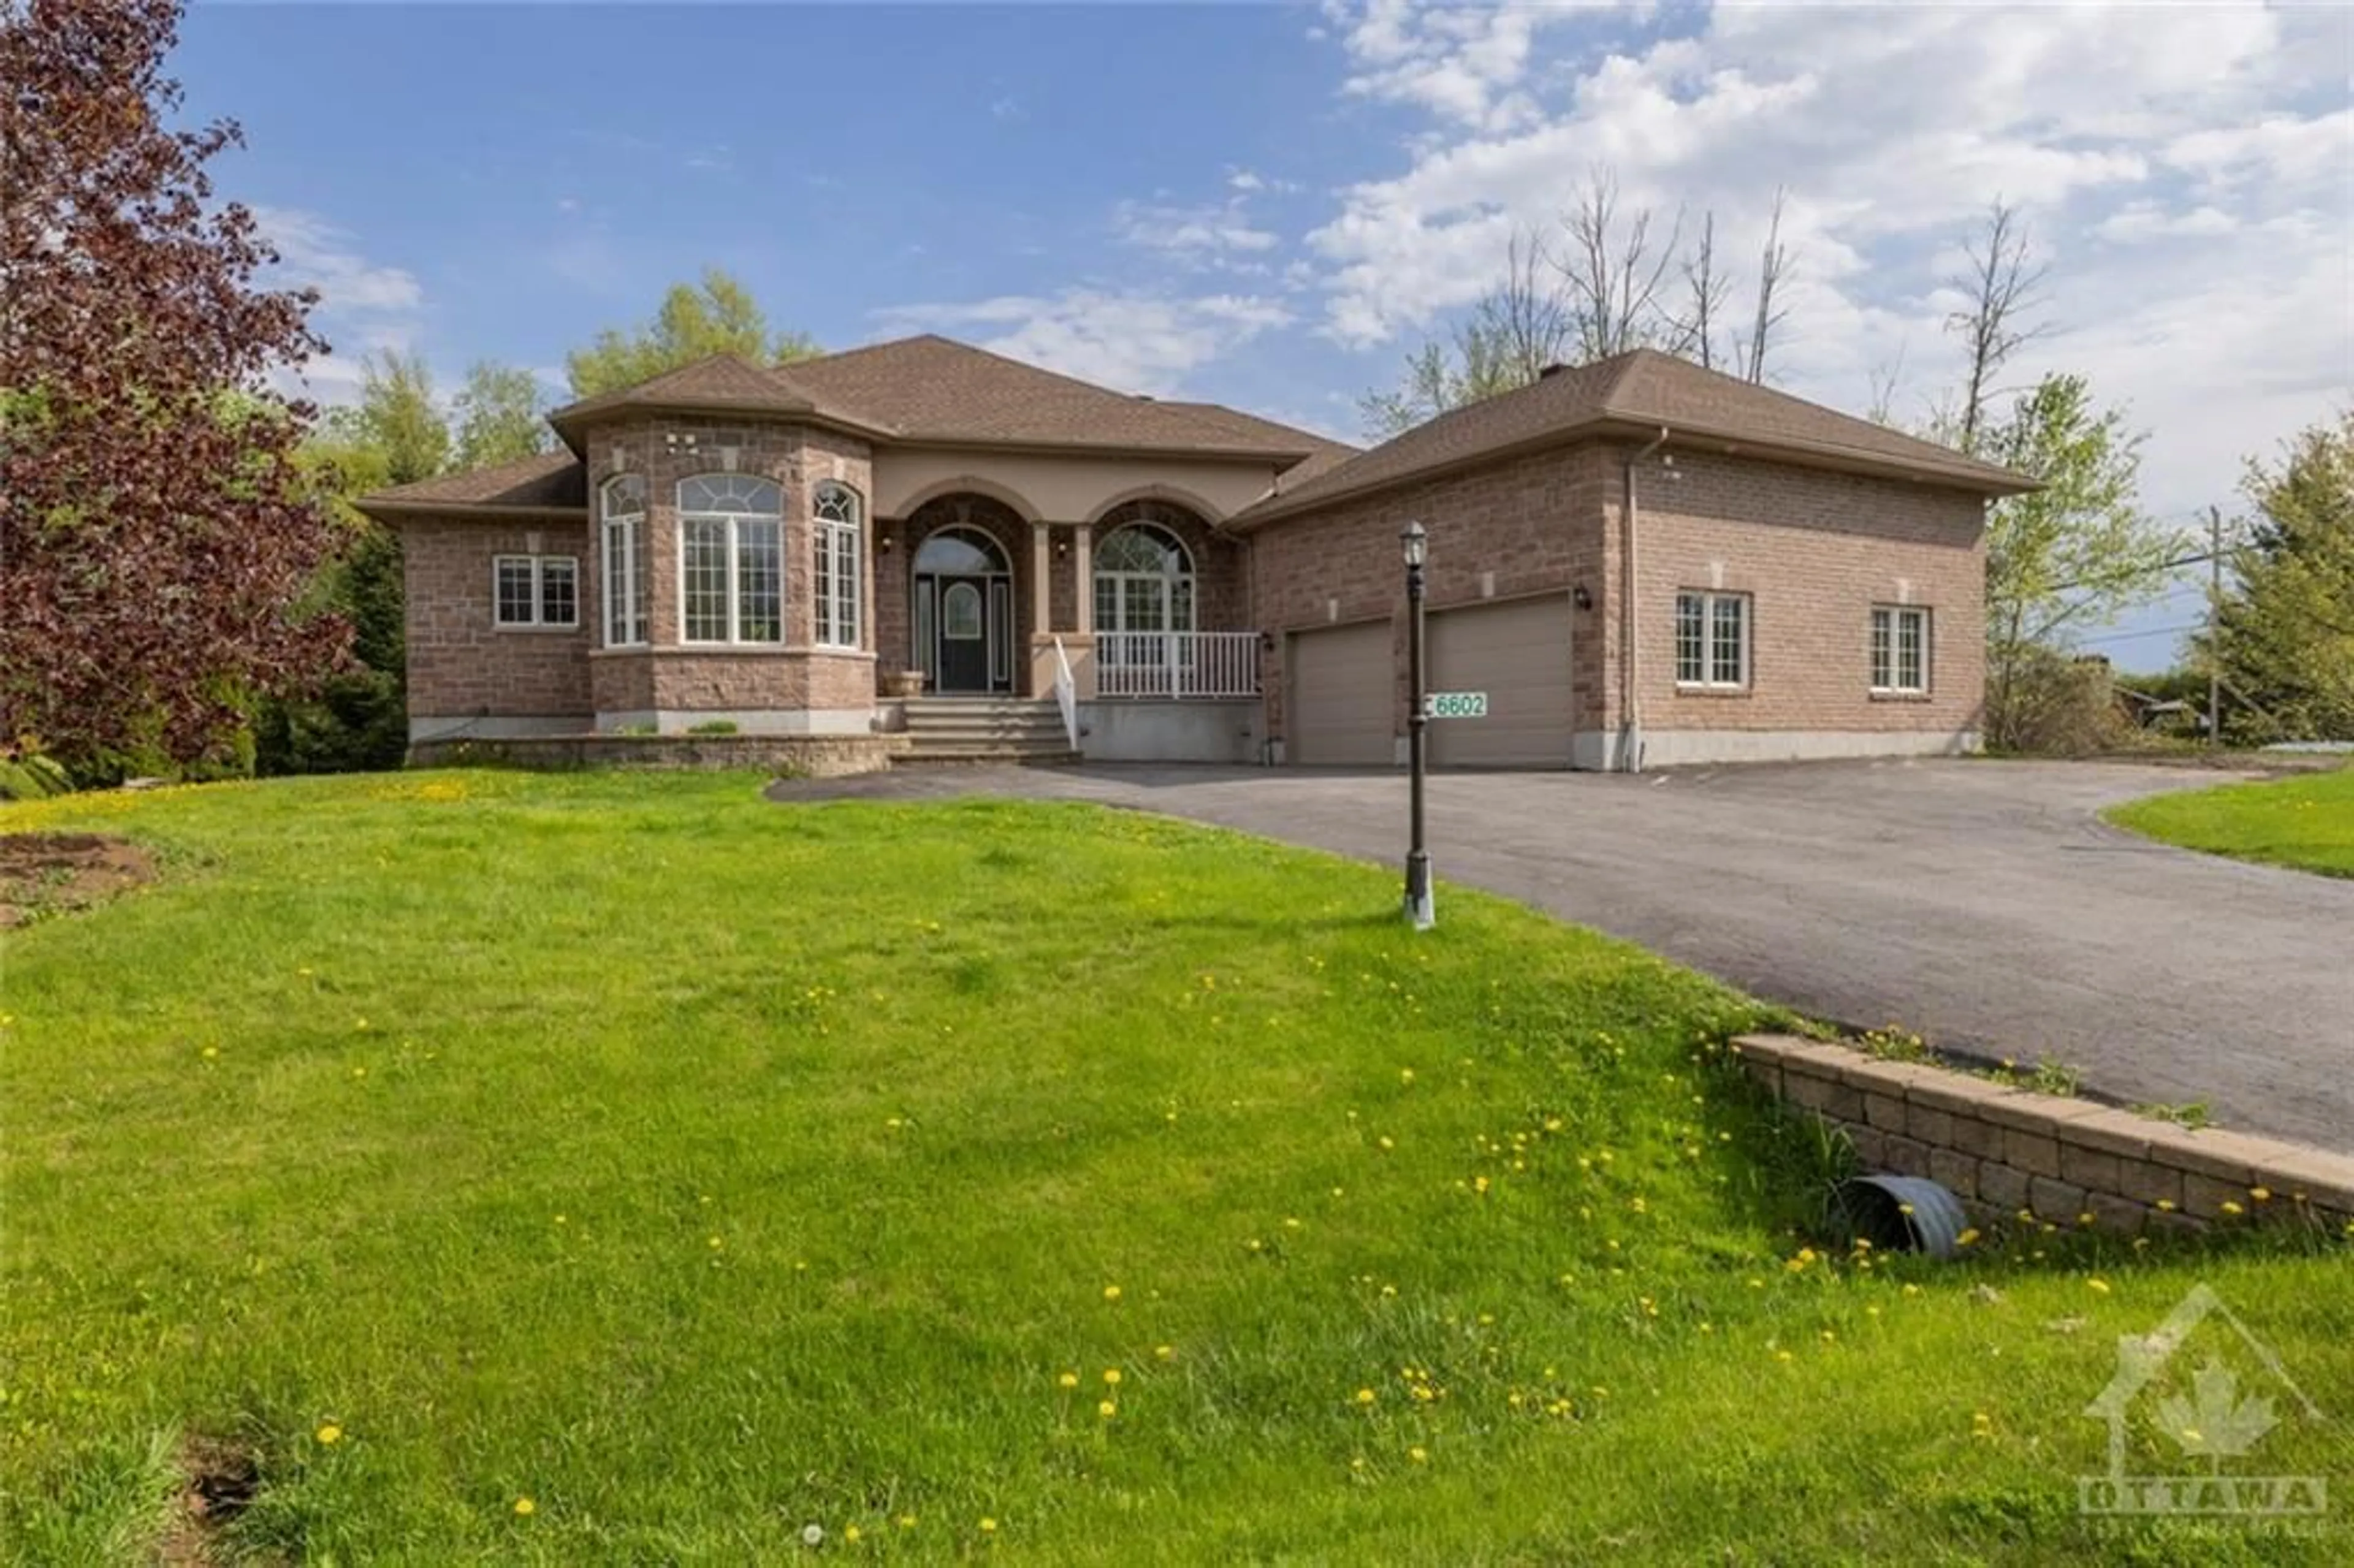 Frontside or backside of a home for 6602 WOODSTREAM Dr, Greely Ontario K4P 1R4